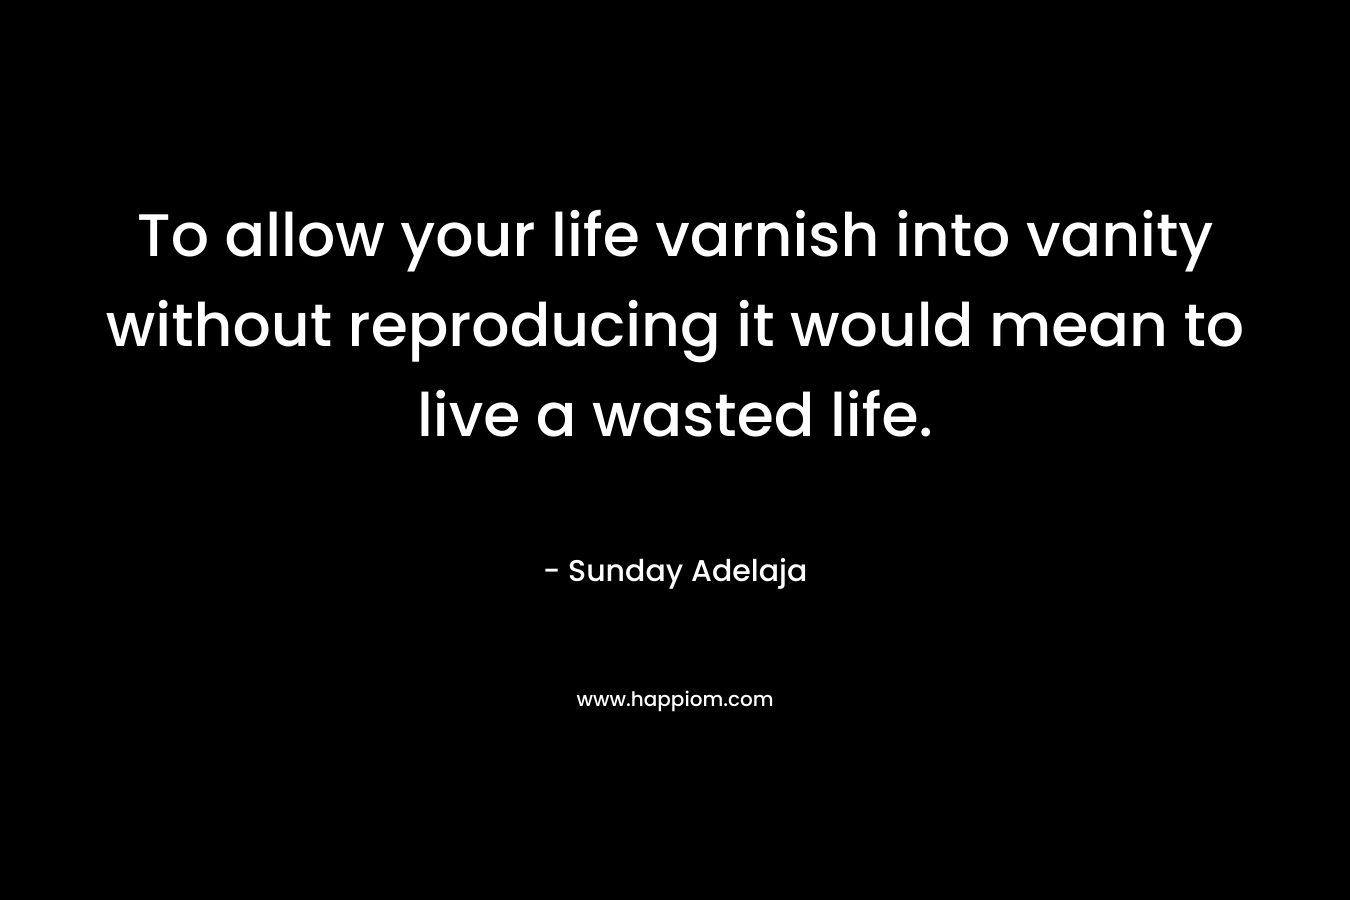 To allow your life varnish into vanity without reproducing it would mean to live a wasted life.